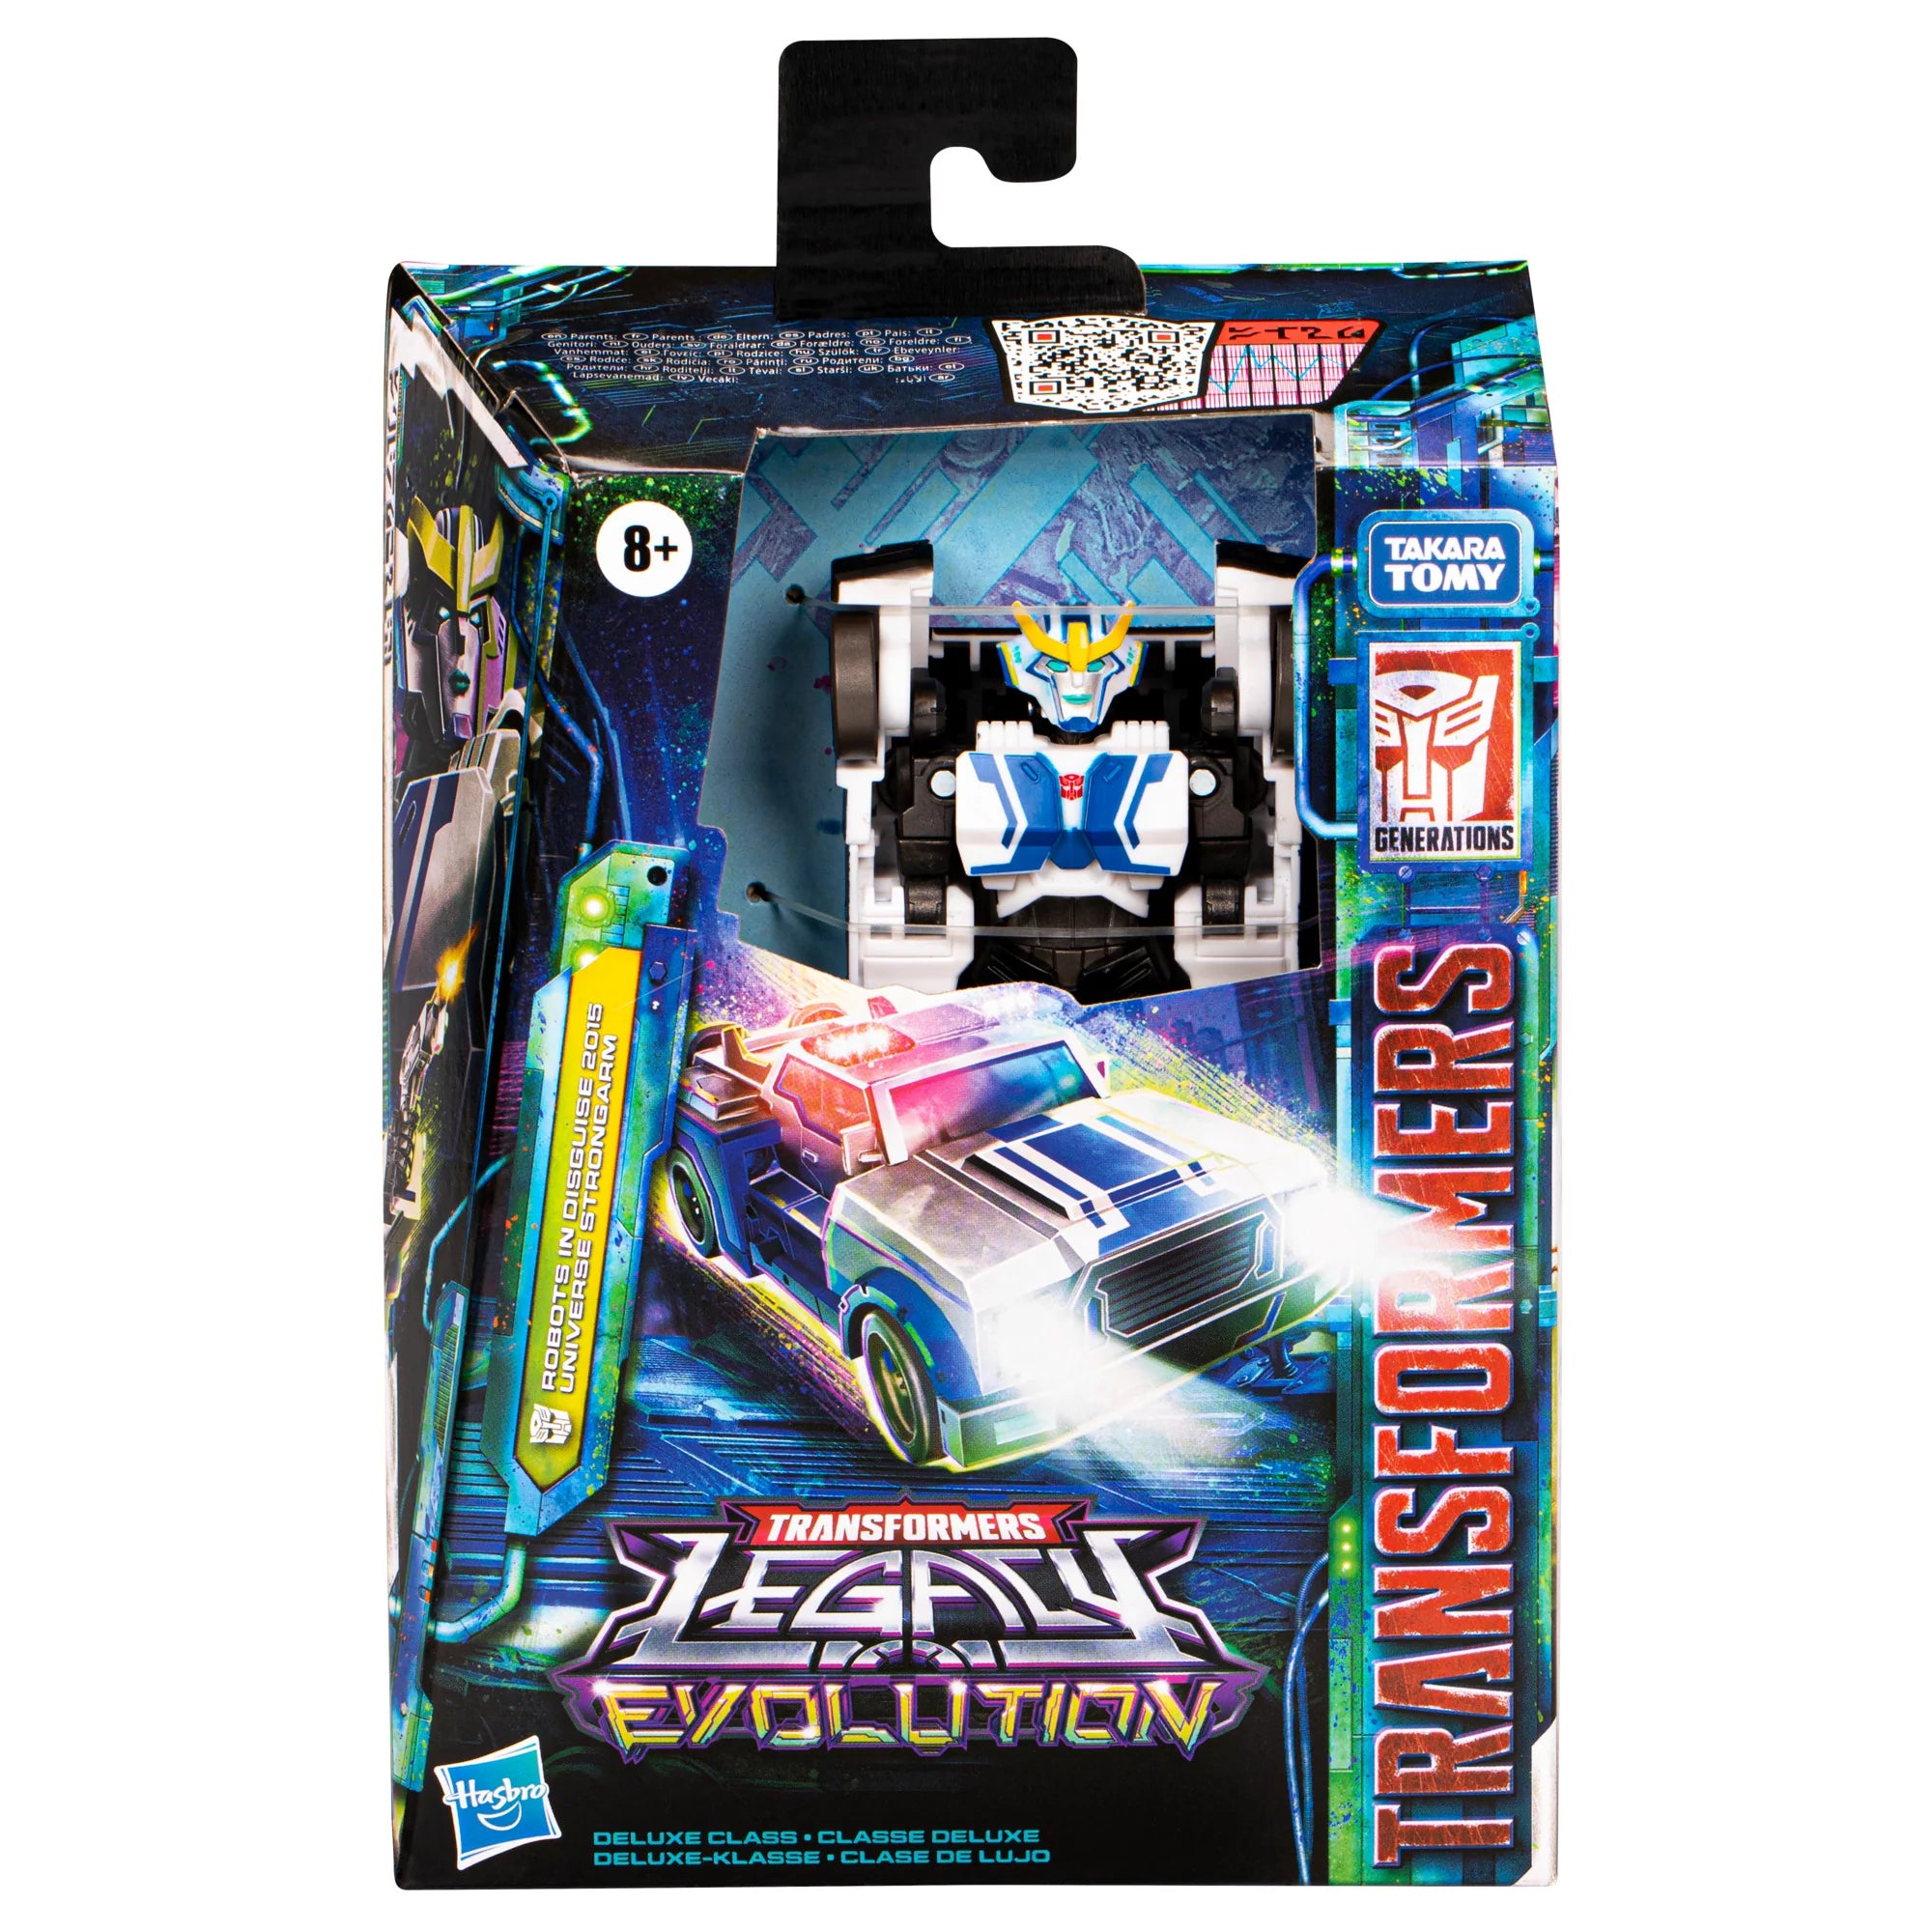 Hasbro - Transformers Legacy Evolution - Deluxe Class Robots in Disguise 2015 Universe Strongarm